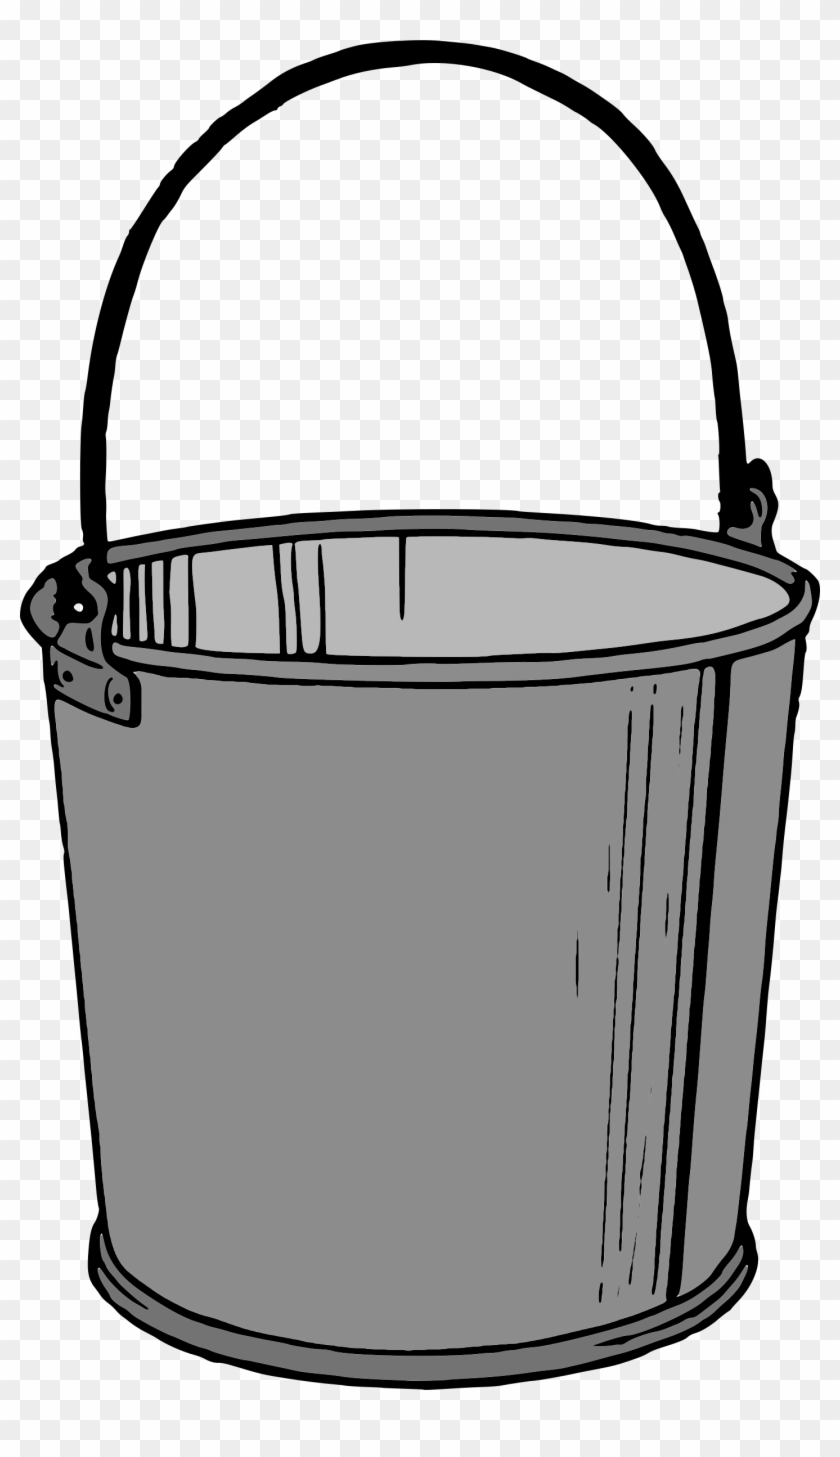 Empc Relief Buckets Welcome - Cartoon Pail Png #1419824